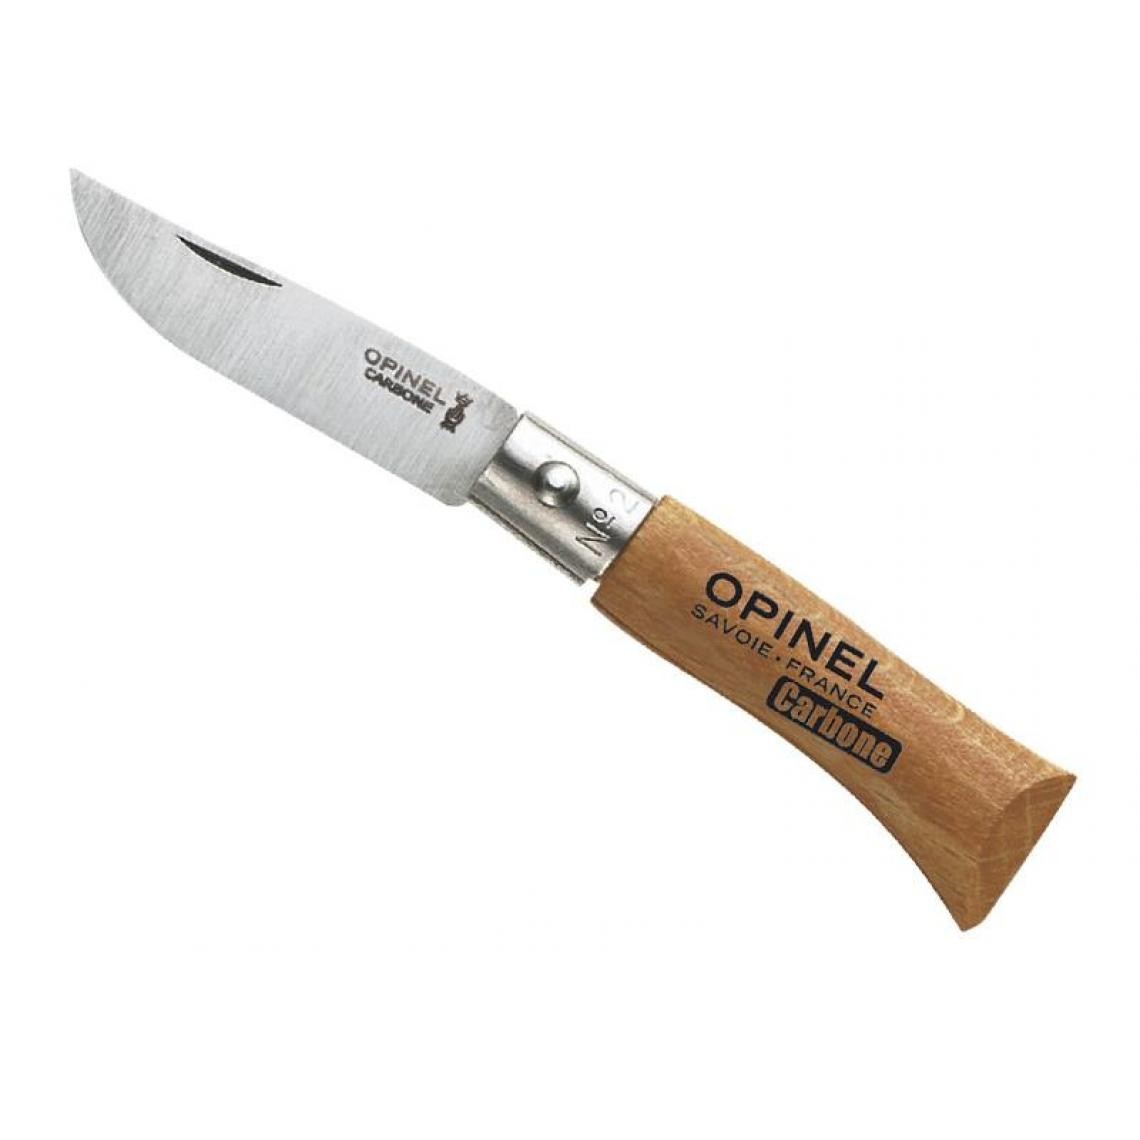 Opinel - OPINEL - 940.02 - BOITE 12 OPINEL N.2 CARBONE - Outils de coupe